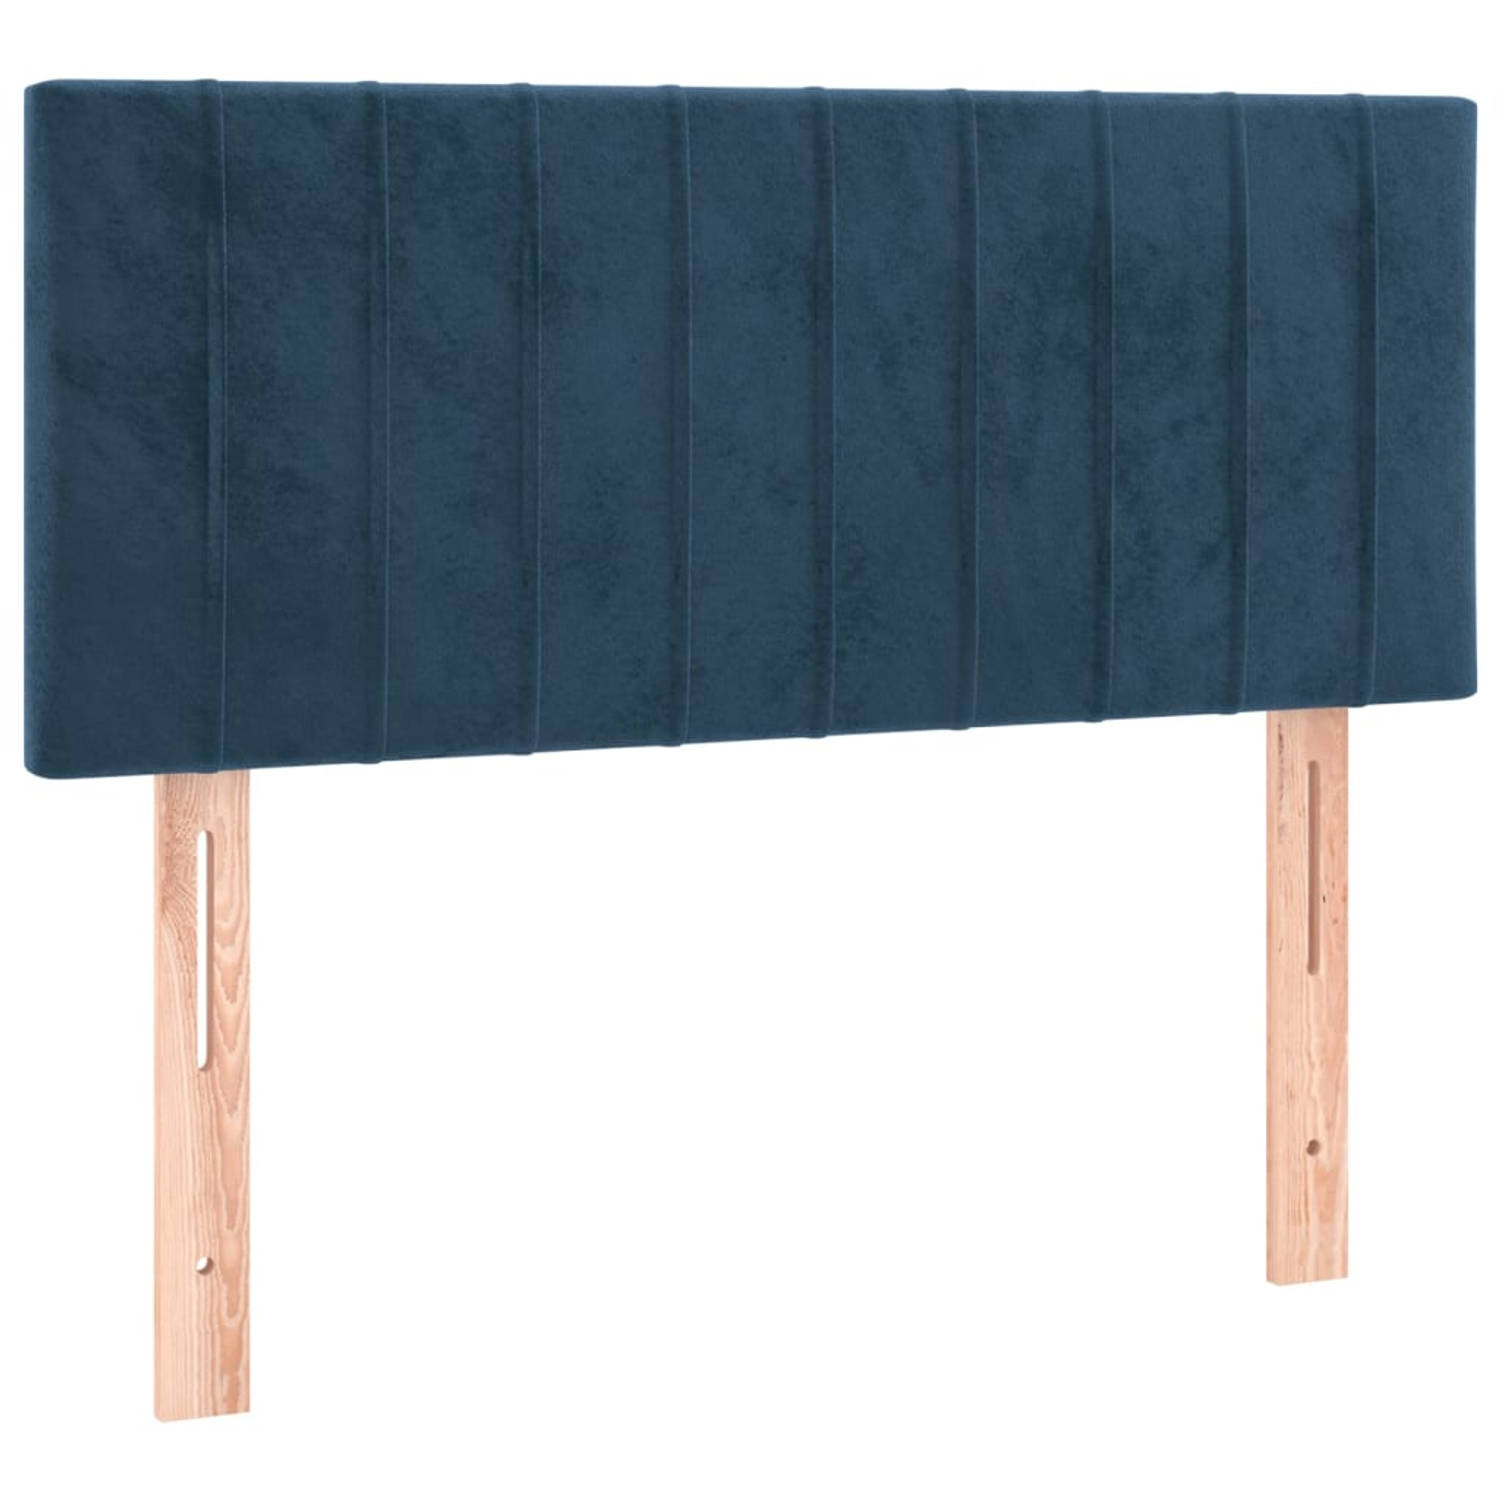 The Living Store Hoofdbord - - Bedaccessoires - 80 x 33.5 x 78 cm - Donkerblauw